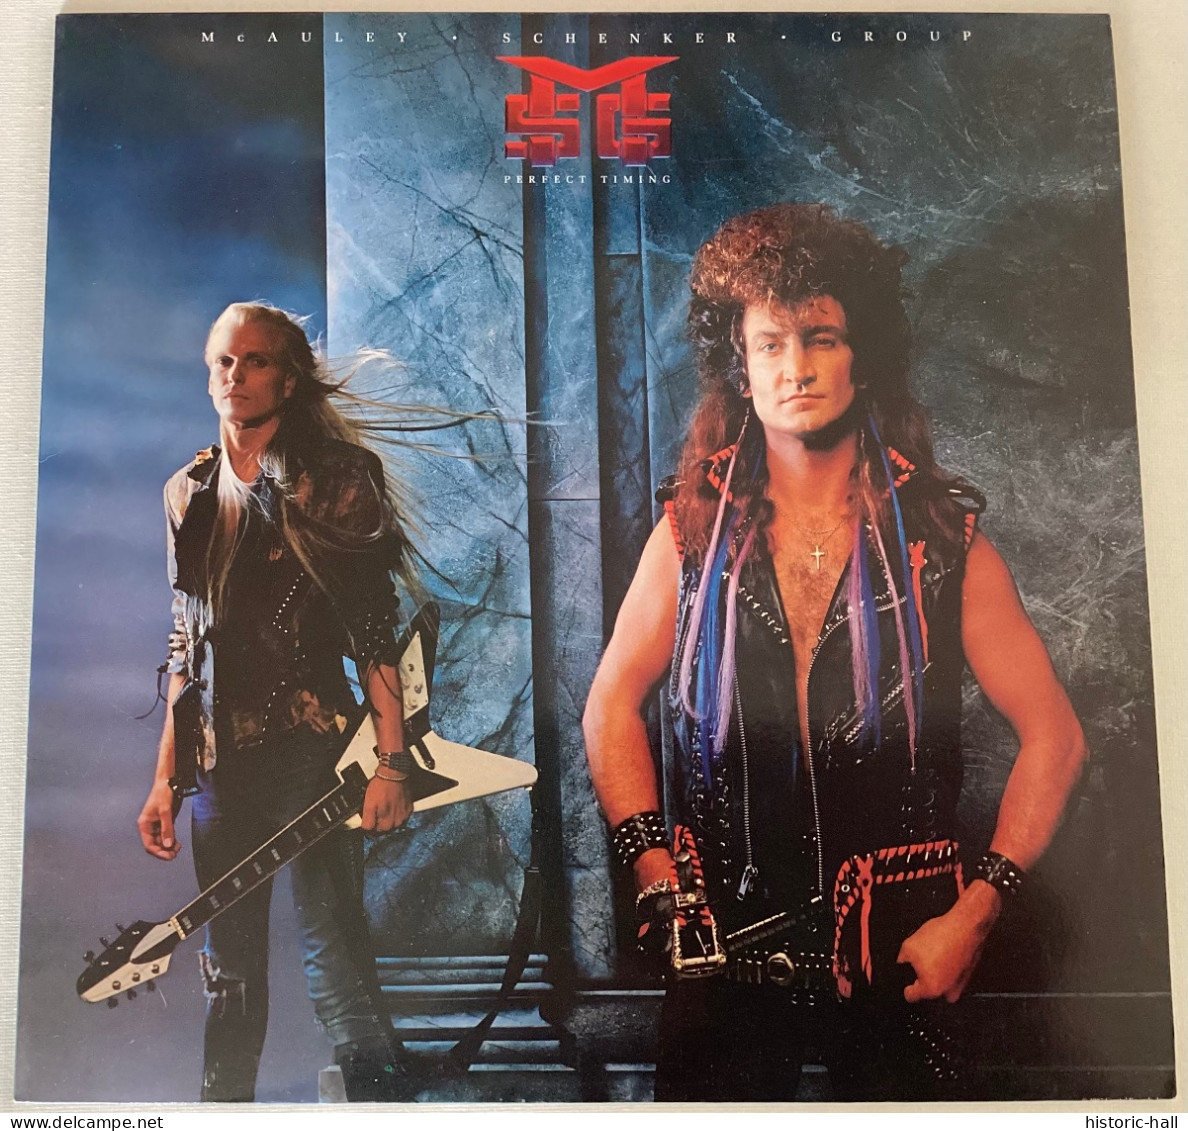 MSG - Perfect Timing - LP - 1987 - French Press - Hard Rock & Metal